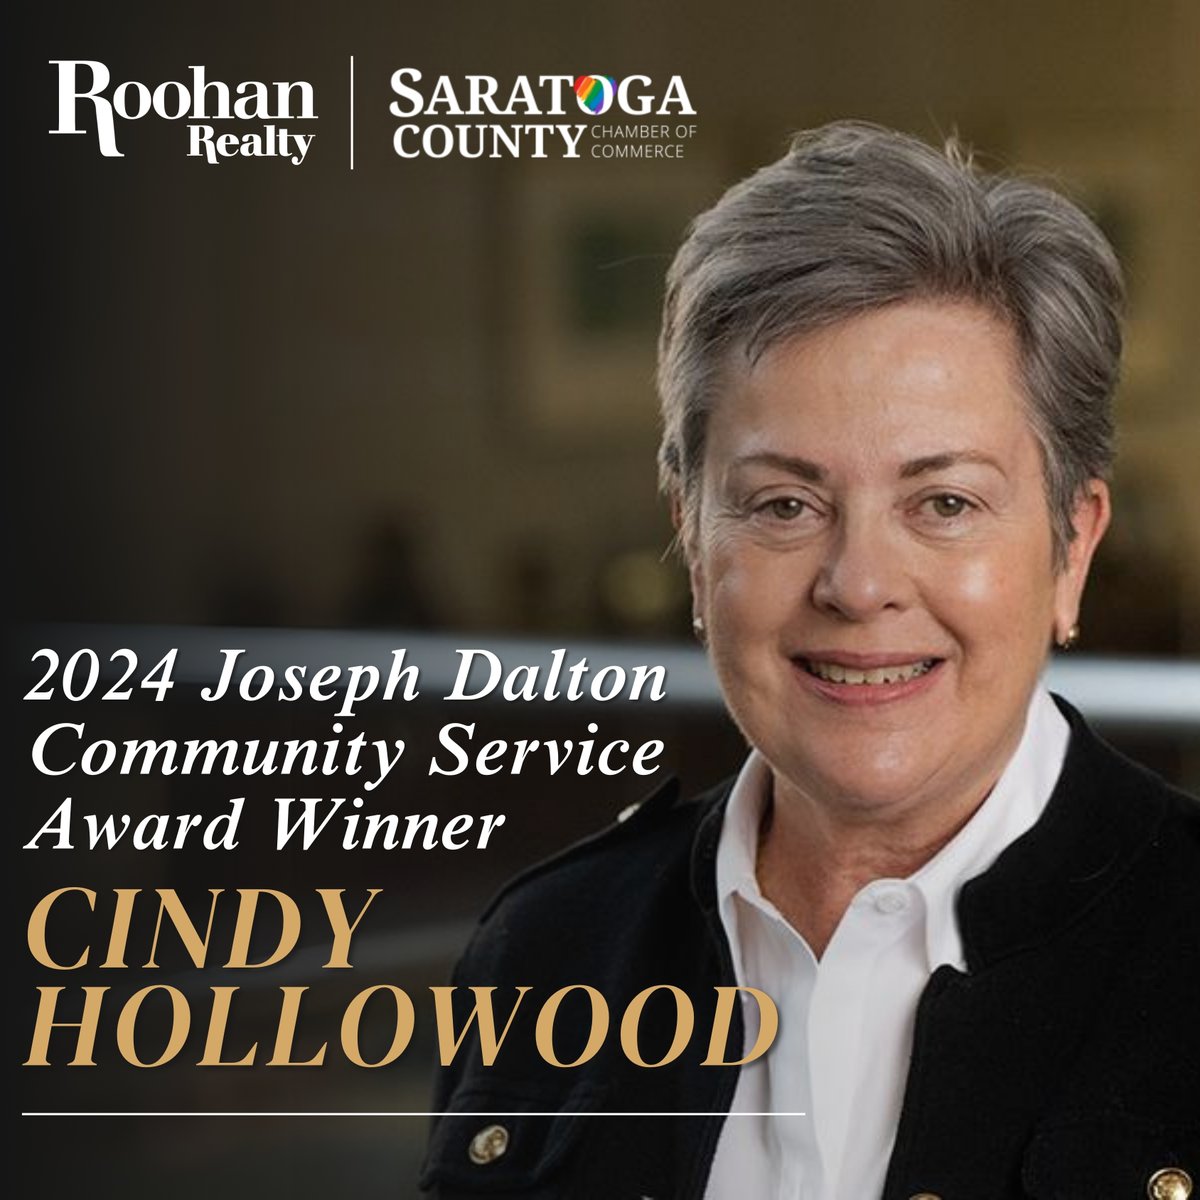 Congratulations to our very own Cindy Hollowood, Licensed Real Estate Salesperson, for being selected as this year’s Joseph Dalton Community Service Award winner 👏👏

@saratogareport #saratogasprings #saratogaracecourse #saratogacountychamber #RealEstate  #CommunityService